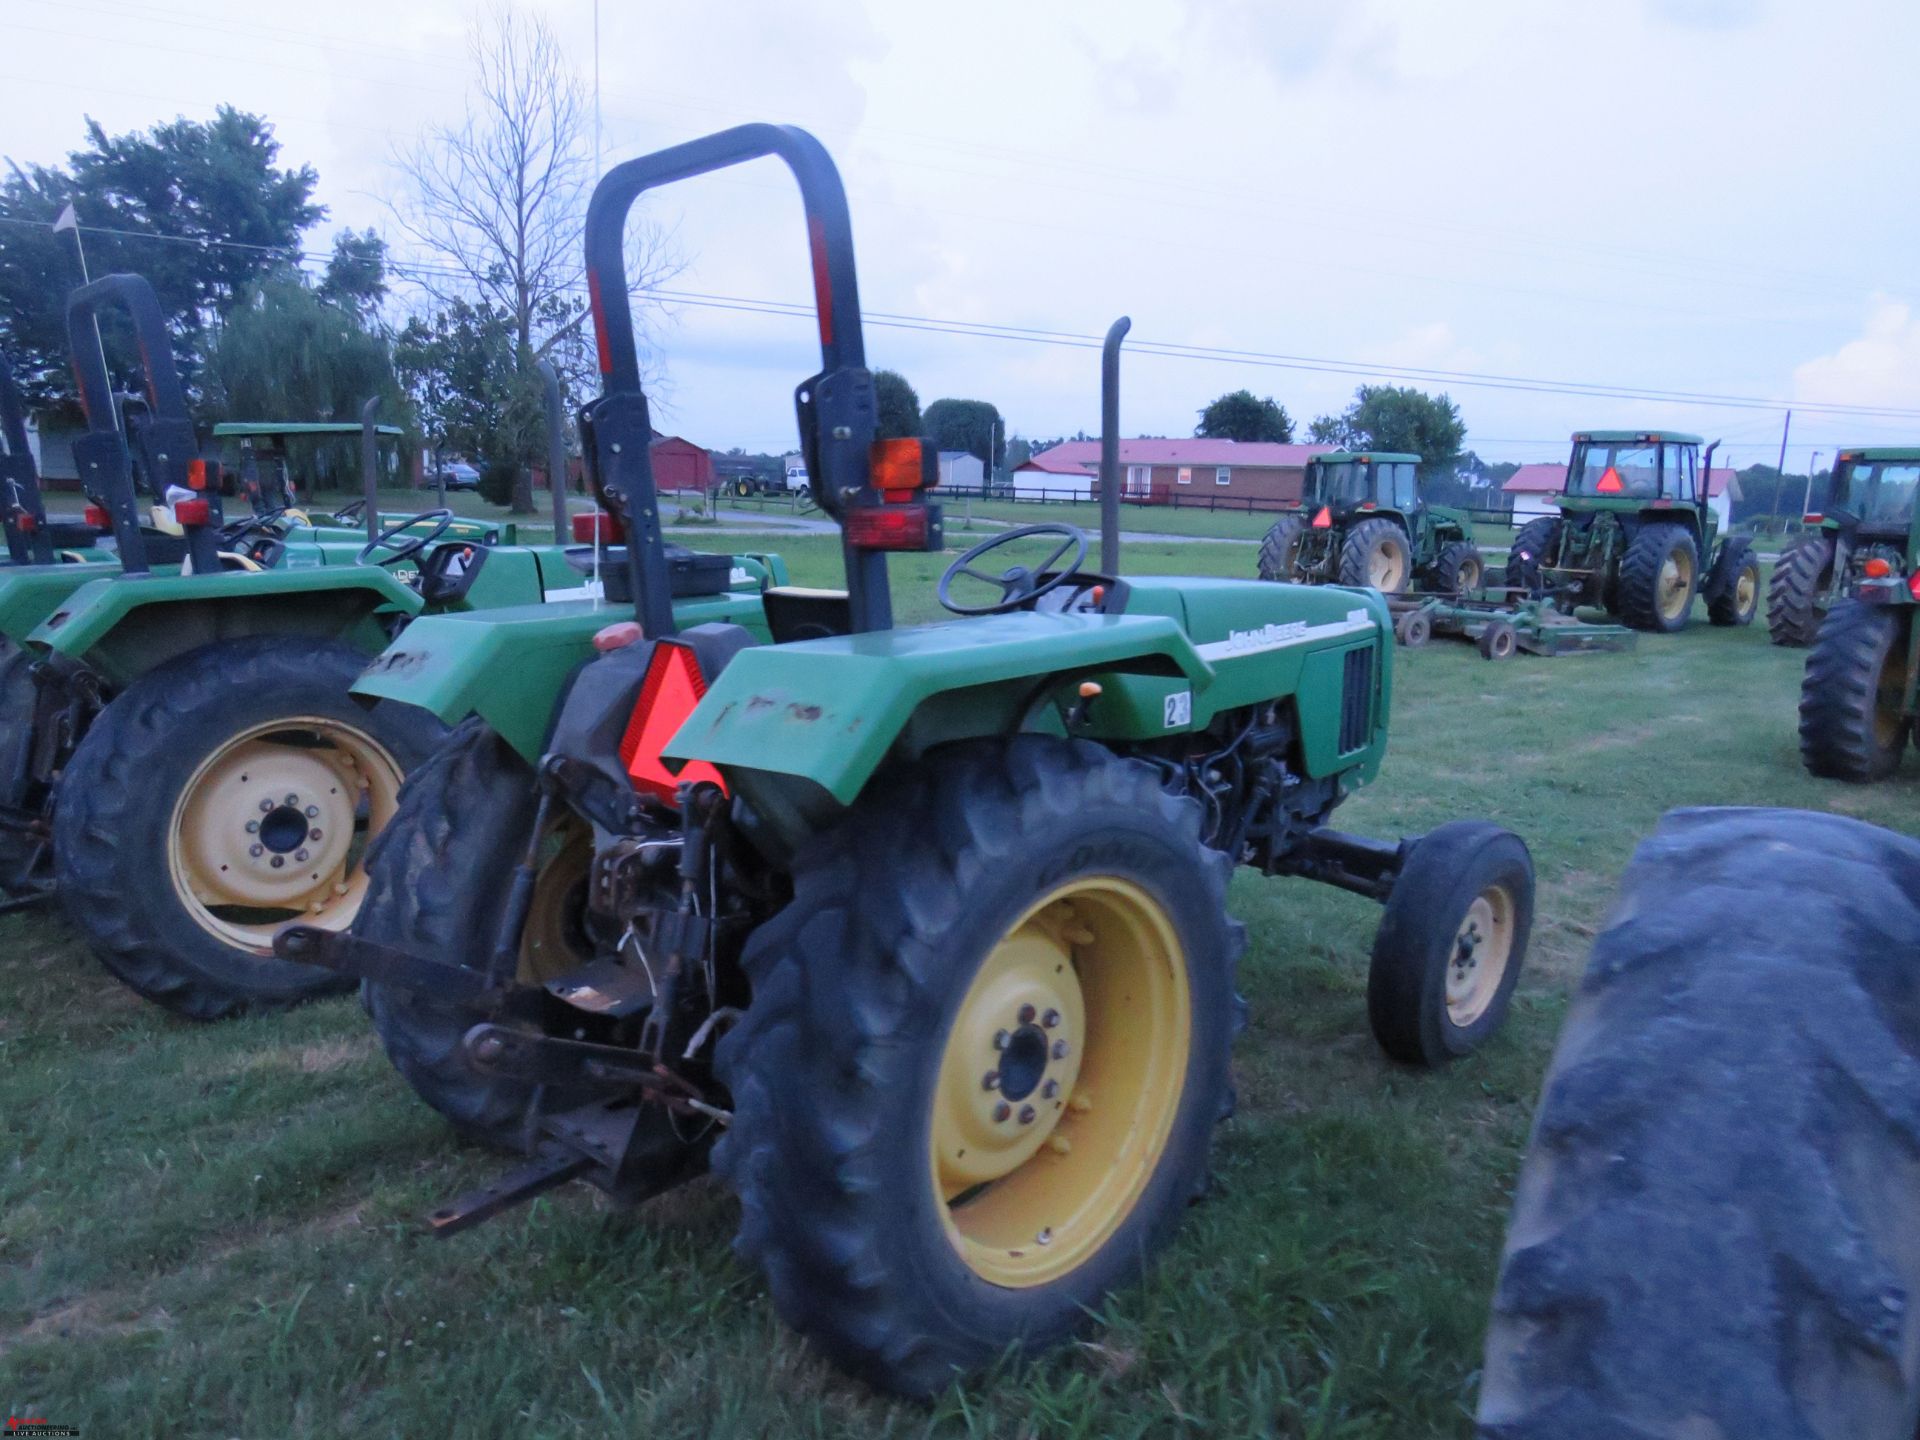 2007 JOHN DEERE 5103 TRACTOR, 3PT, NO TOP LINK, HAS PTO, 13.6-28 REAR TIRES, HOURS NOT AVAILABLE - Image 3 of 8